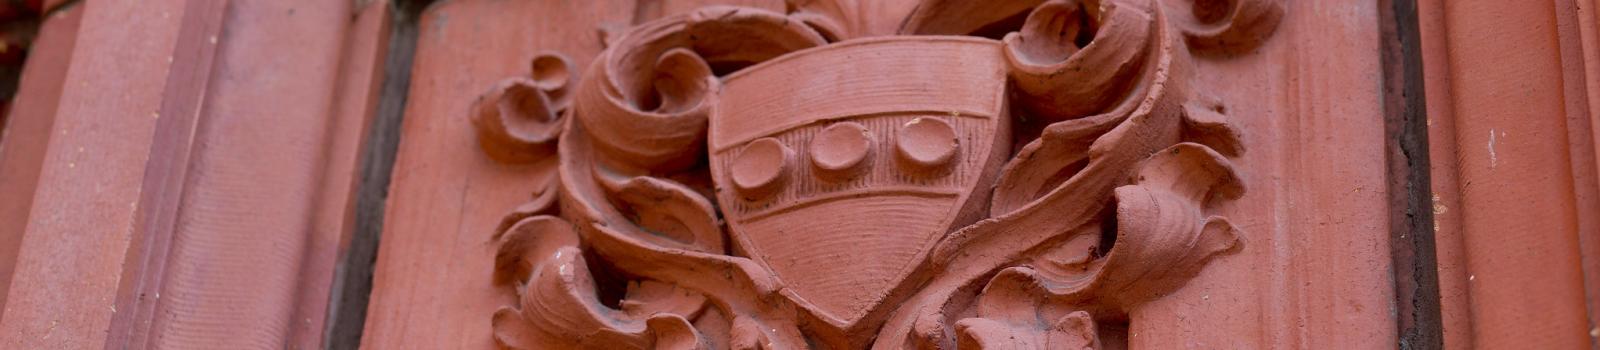 Penn shield molding close-up in red